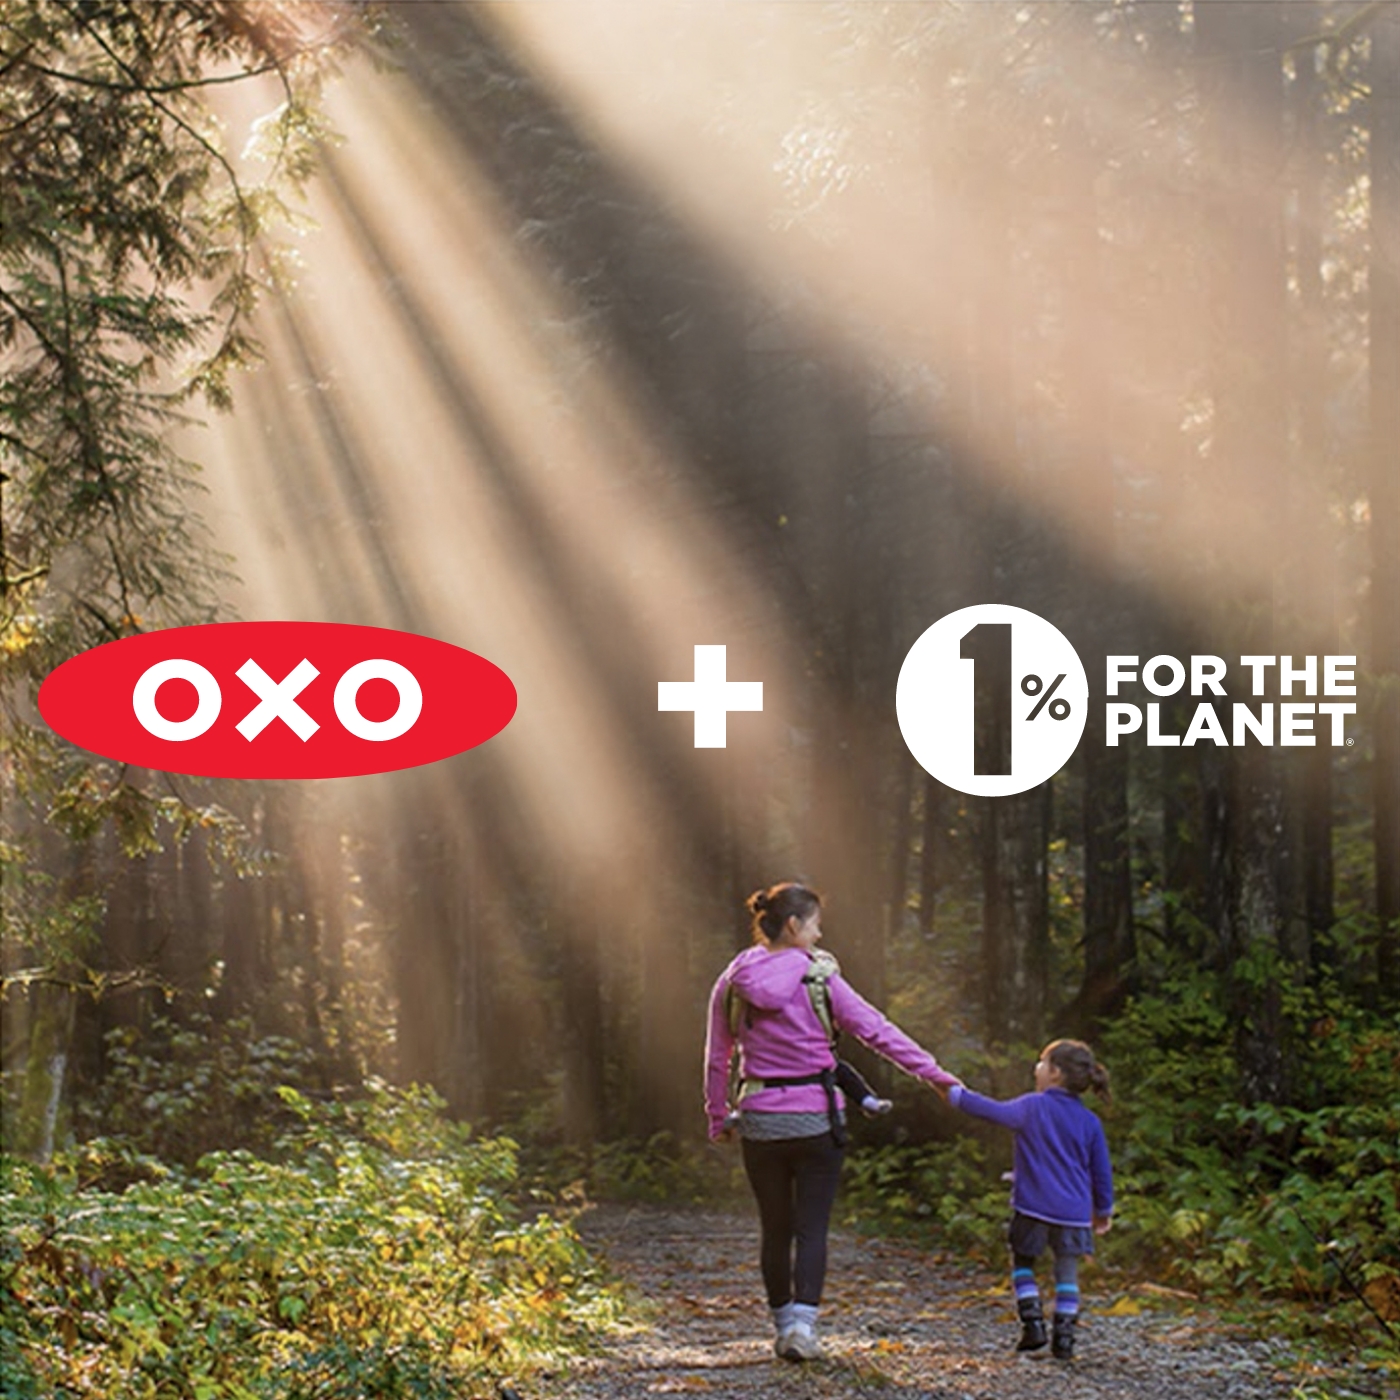 oxo 1% for the planet